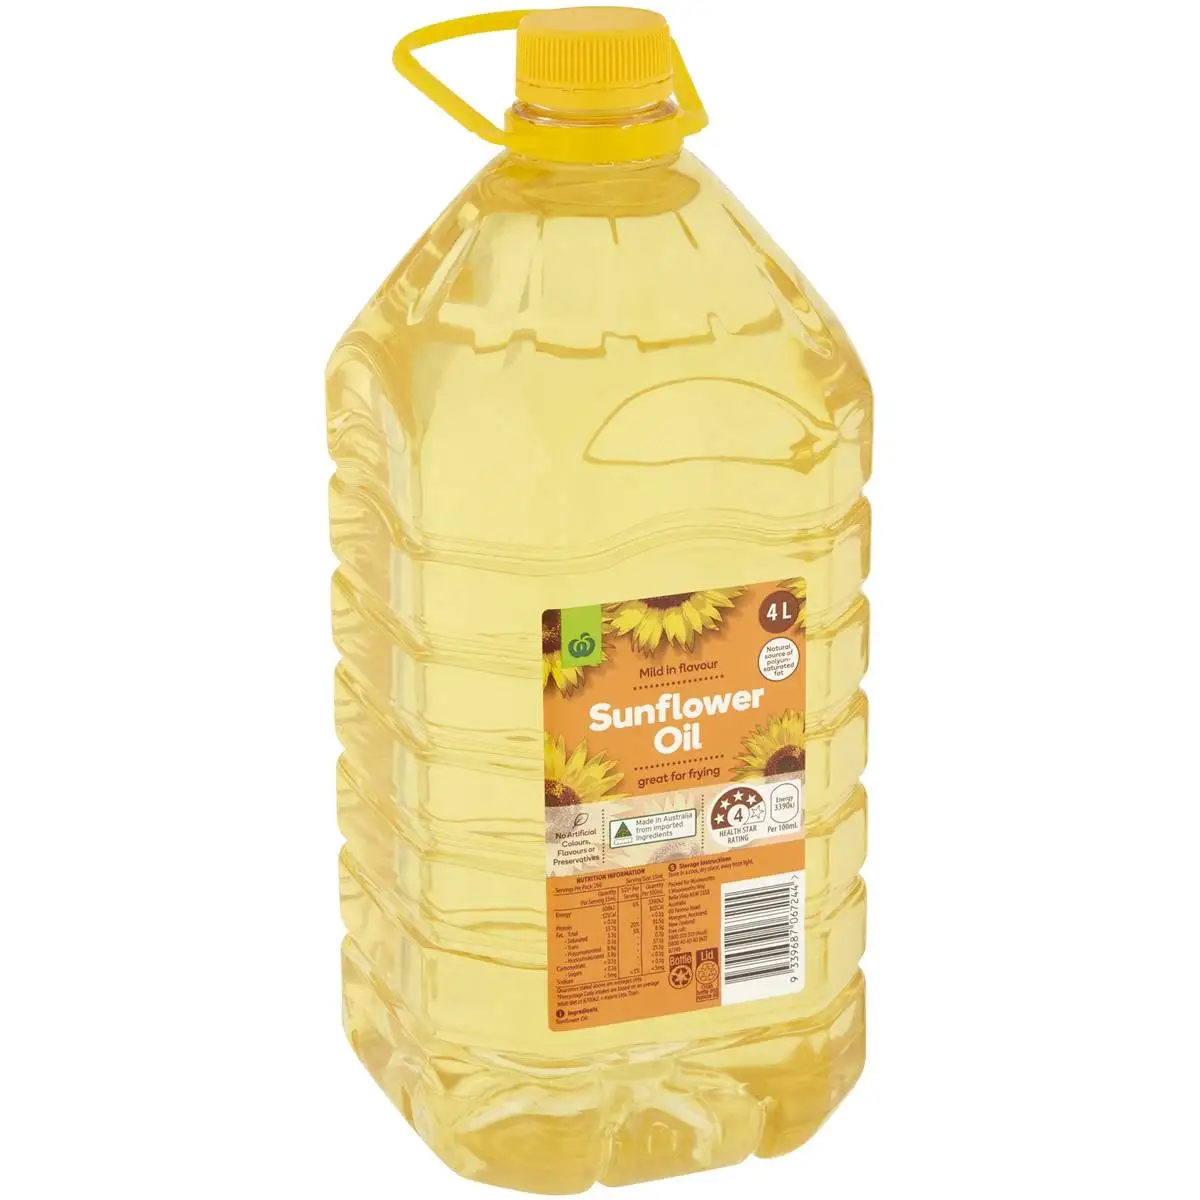 pure and refined edible sunflower pure vegetable cooking oil